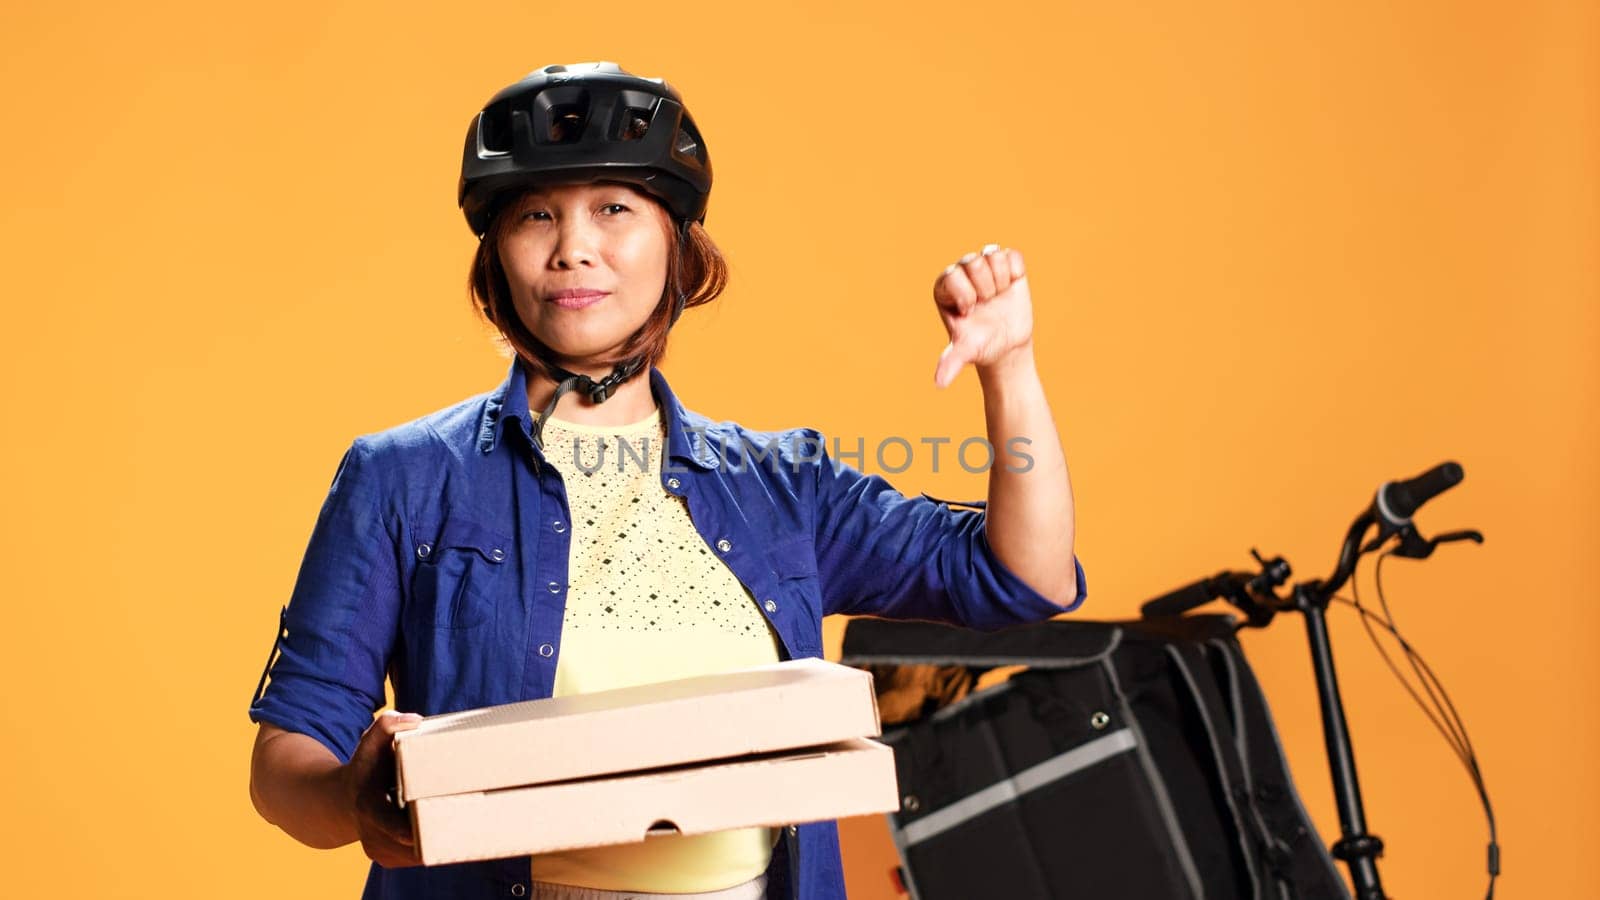 Pizza courier showing thumbs down sign by DCStudio